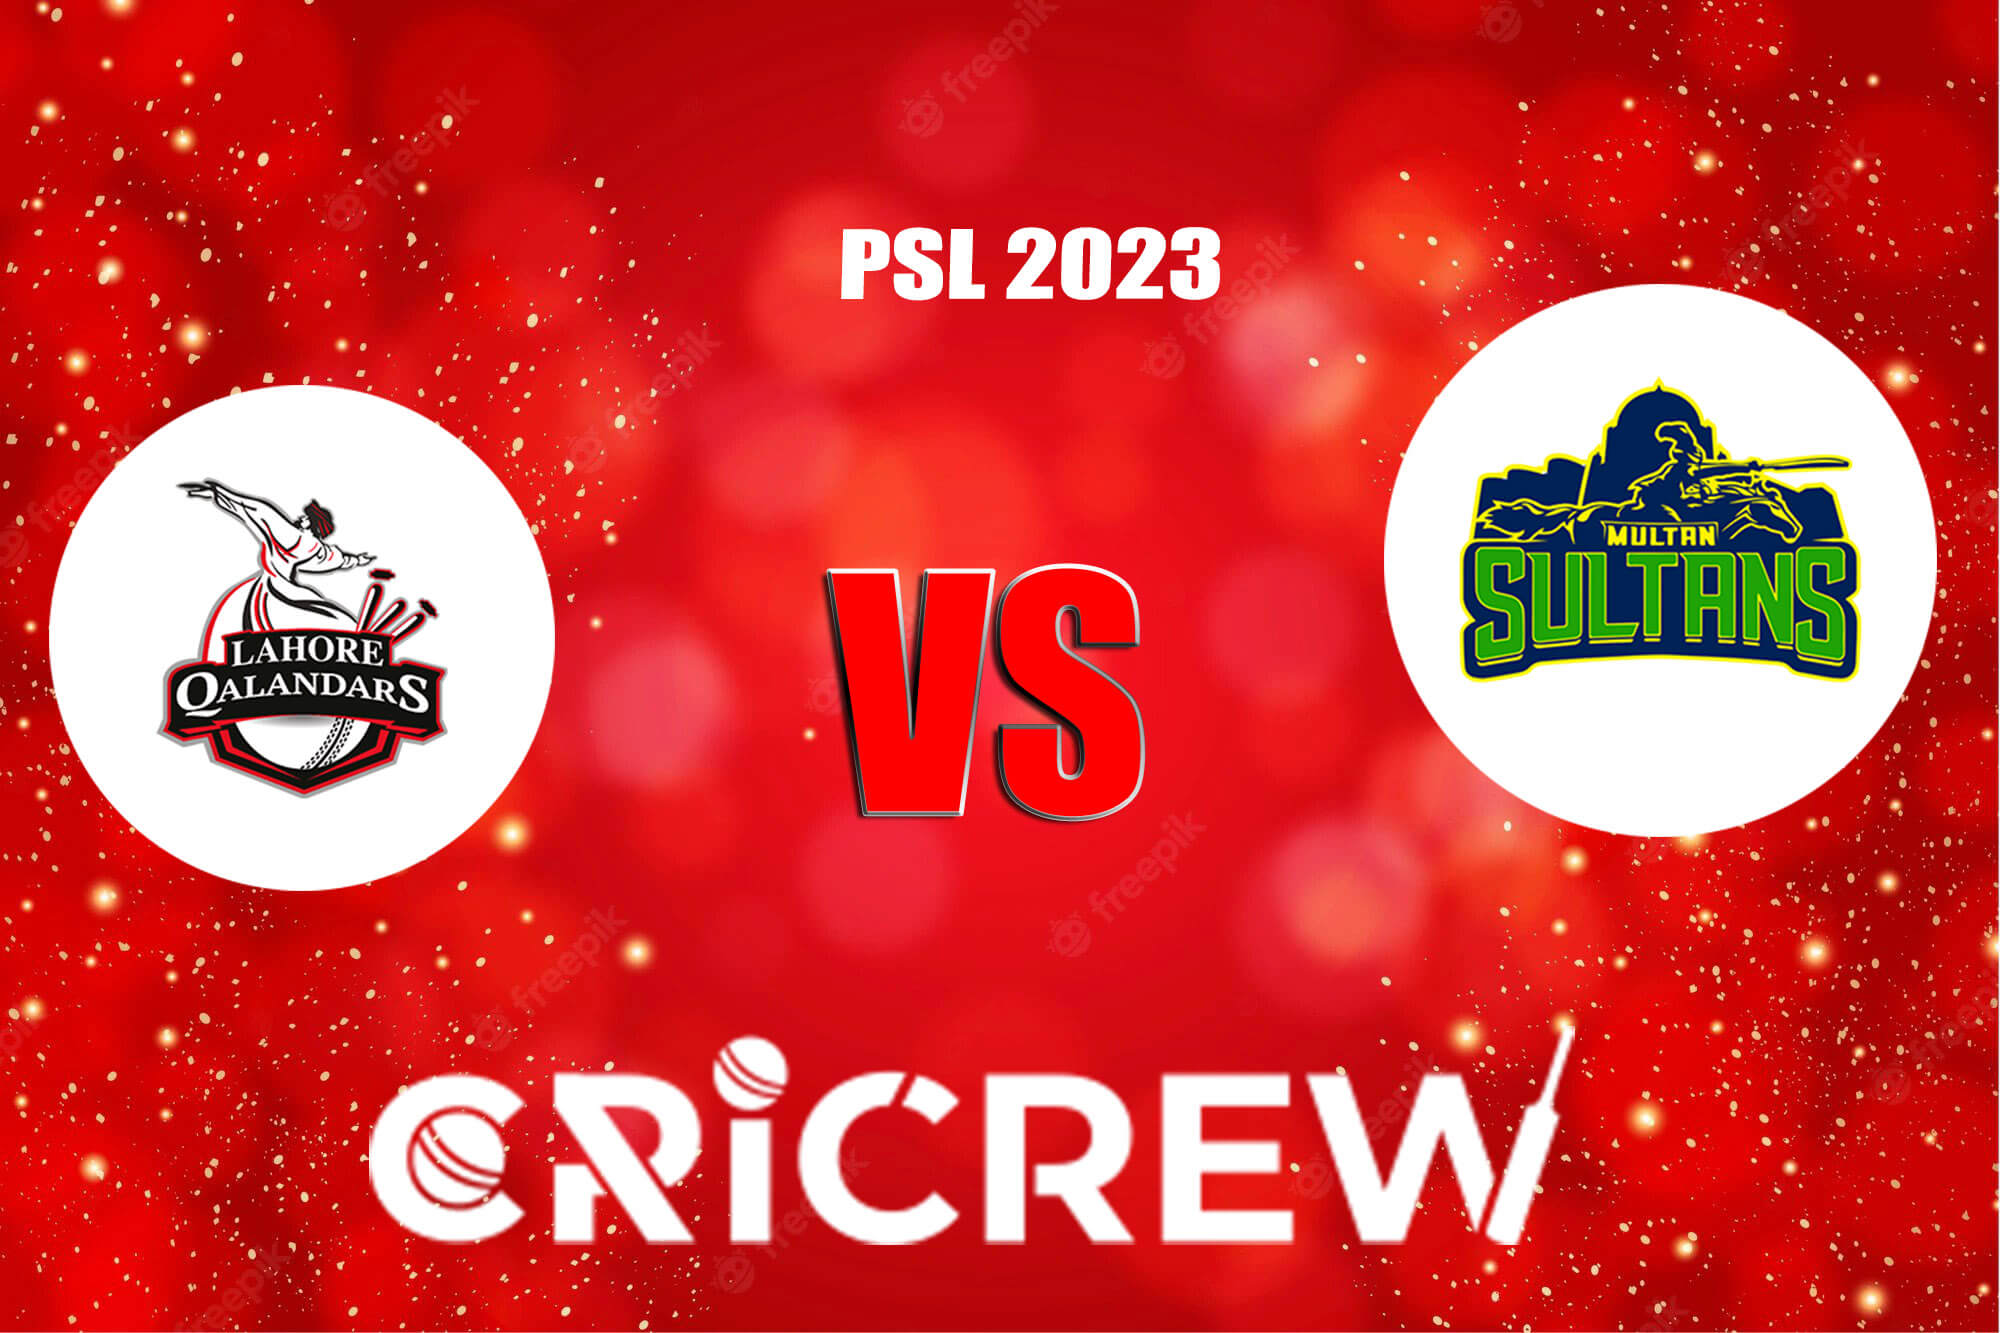 MUL vs LAH Live Score starts on Mar 18, 2023, 12:35 IST Multan Cricket Stadium, Multan, Pakistan. Here on www.cricrew.com you can find all Live, Upcoming and Re